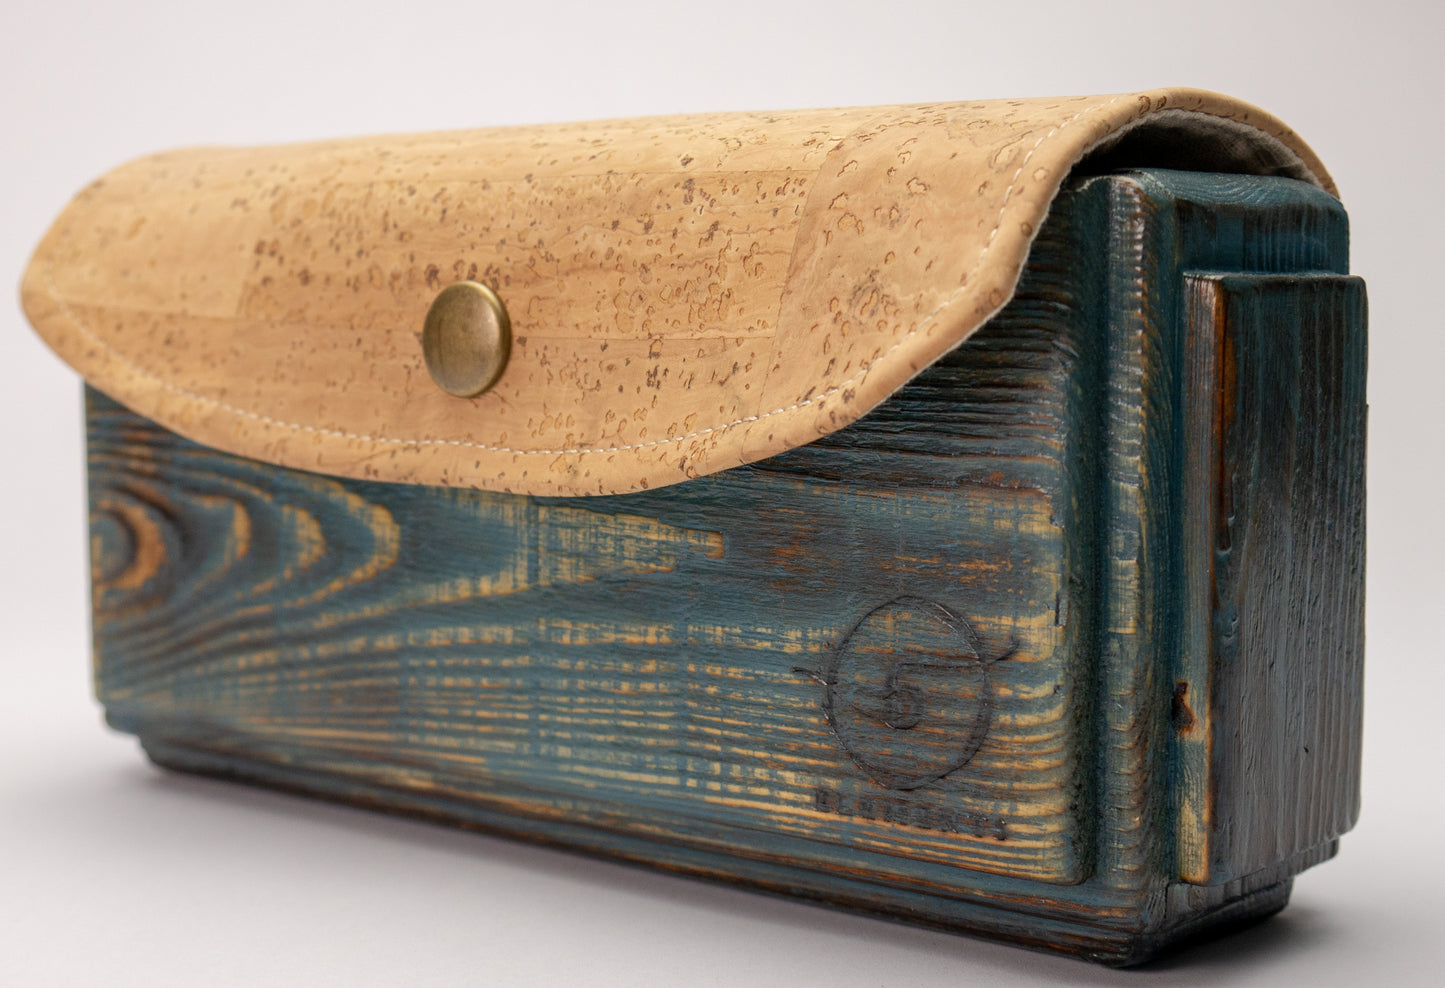 Wooden handmade purse in blue tone with natural cork leather.